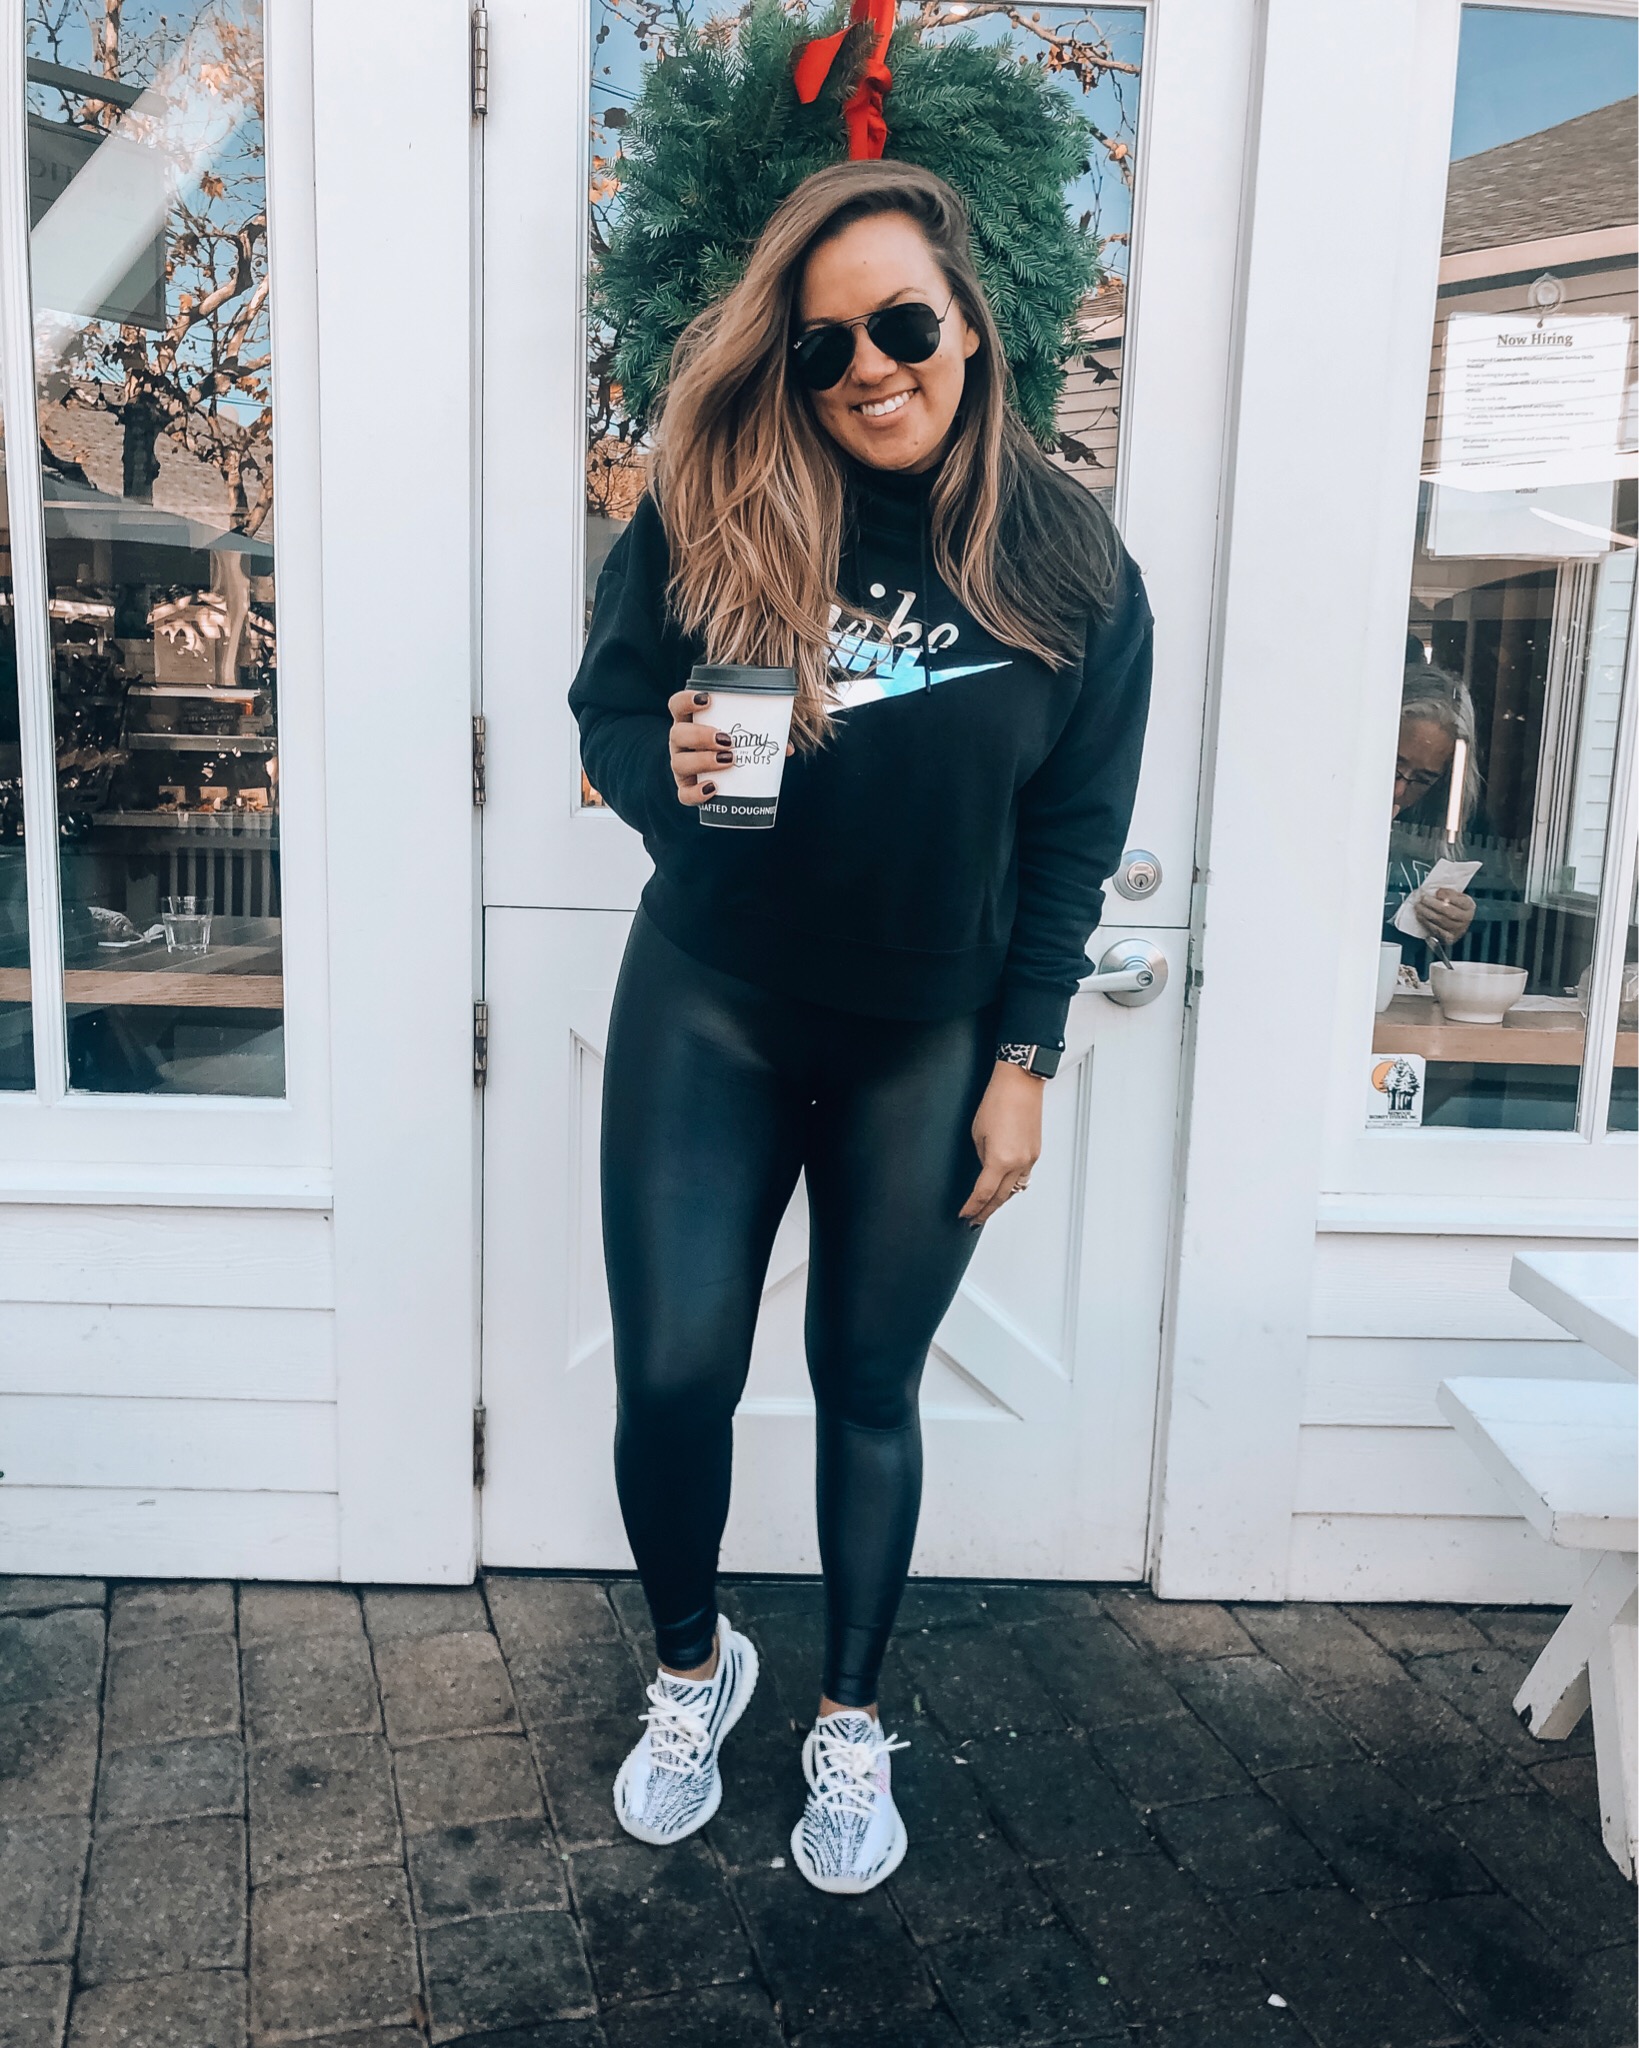 San Francisco Blogger Ashley Zeal from Two Peas in a Prada shares her favorite half-yearly activewear from the huge sale at Nordstrom.